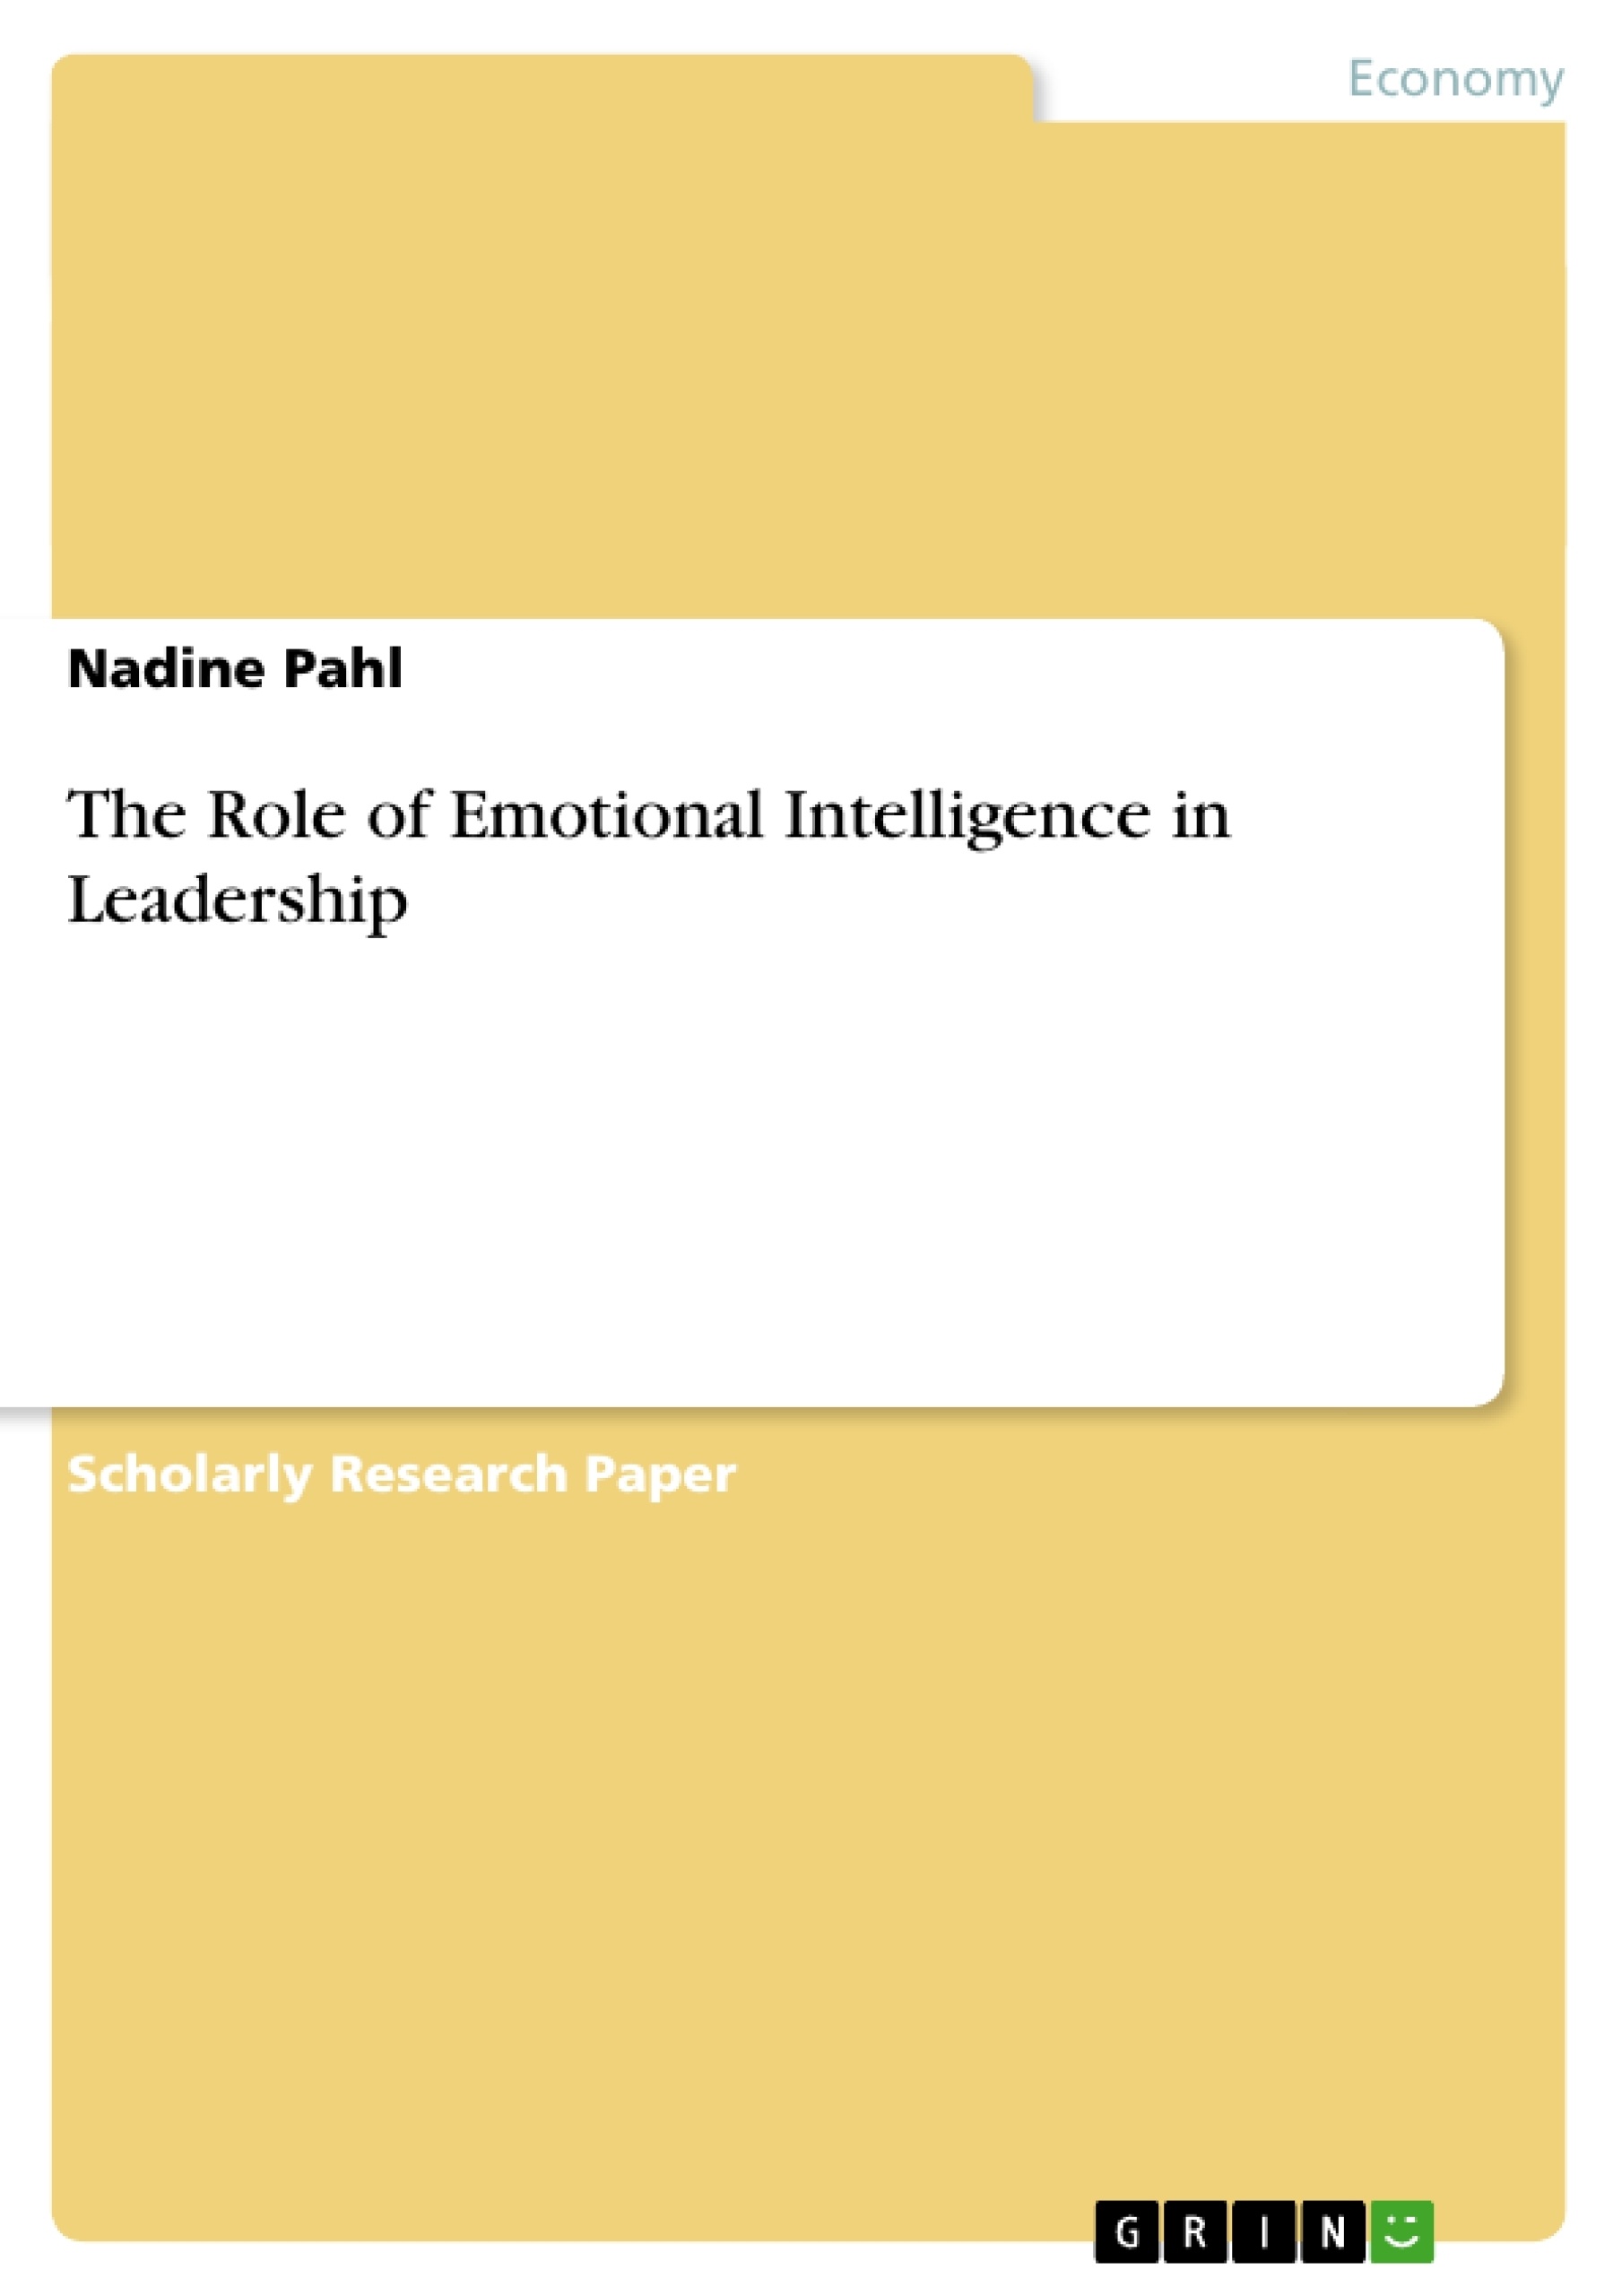 Title: The Role of Emotional Intelligence in Leadership